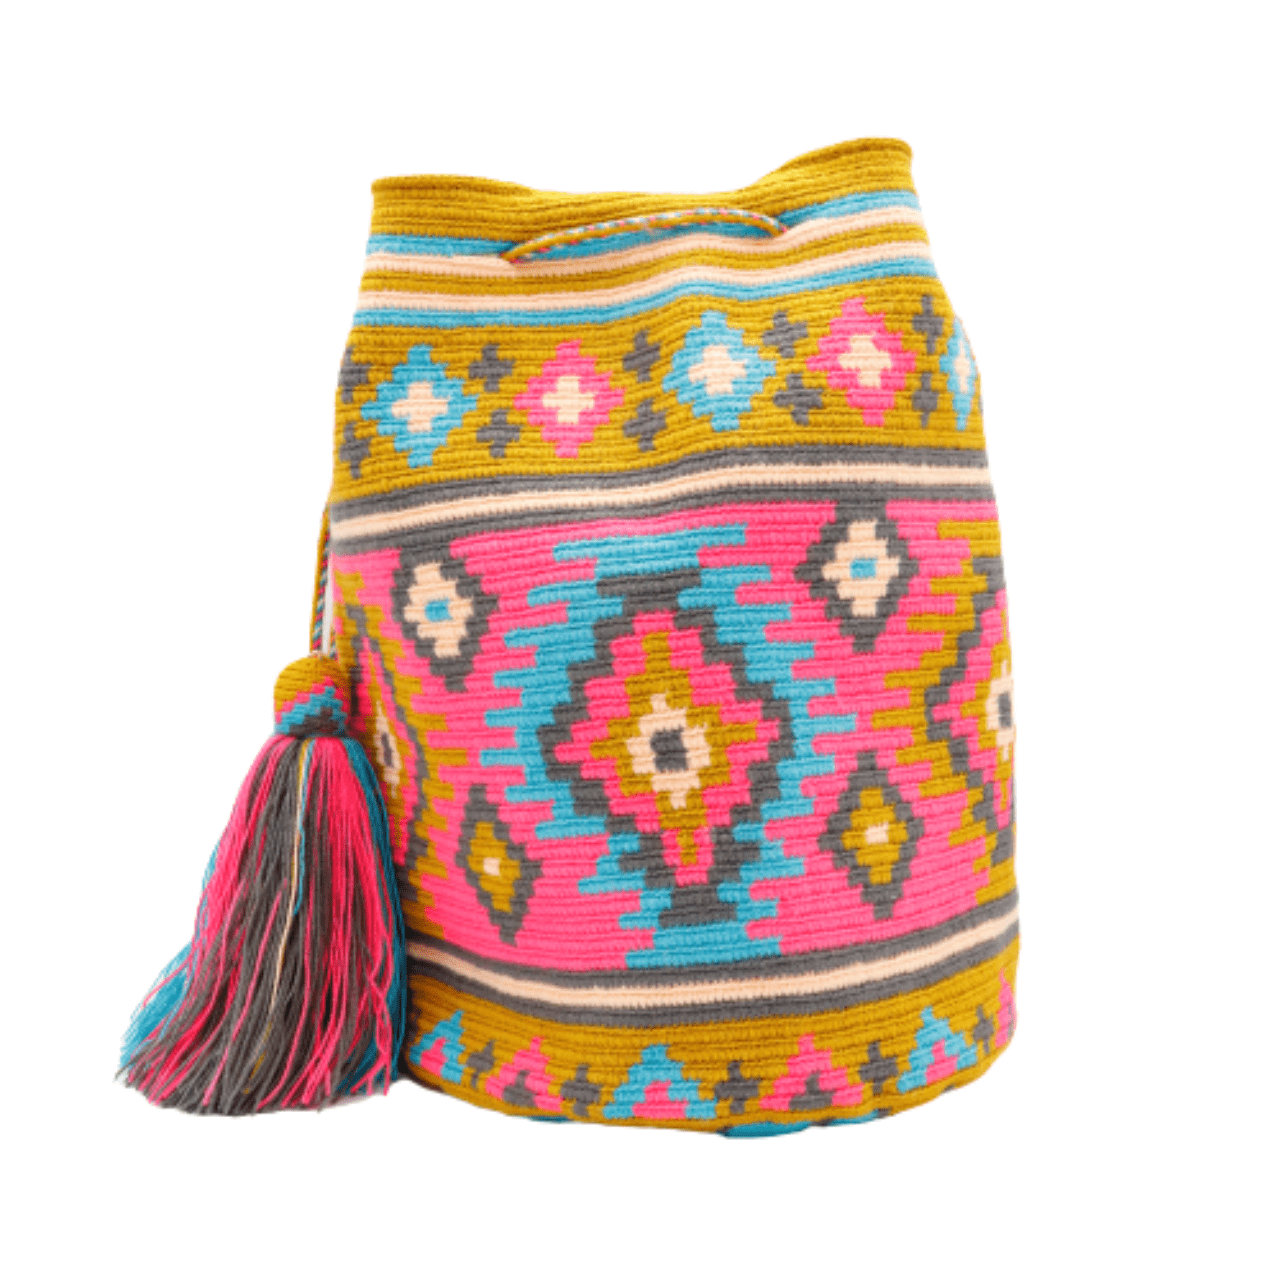 Embrace the charm of the Amelia Wayuu Bag in delightful, happy colors. This perfect companion is bound to turn heads wherever you carry it, adding a touch of joy and style to your ensemble.